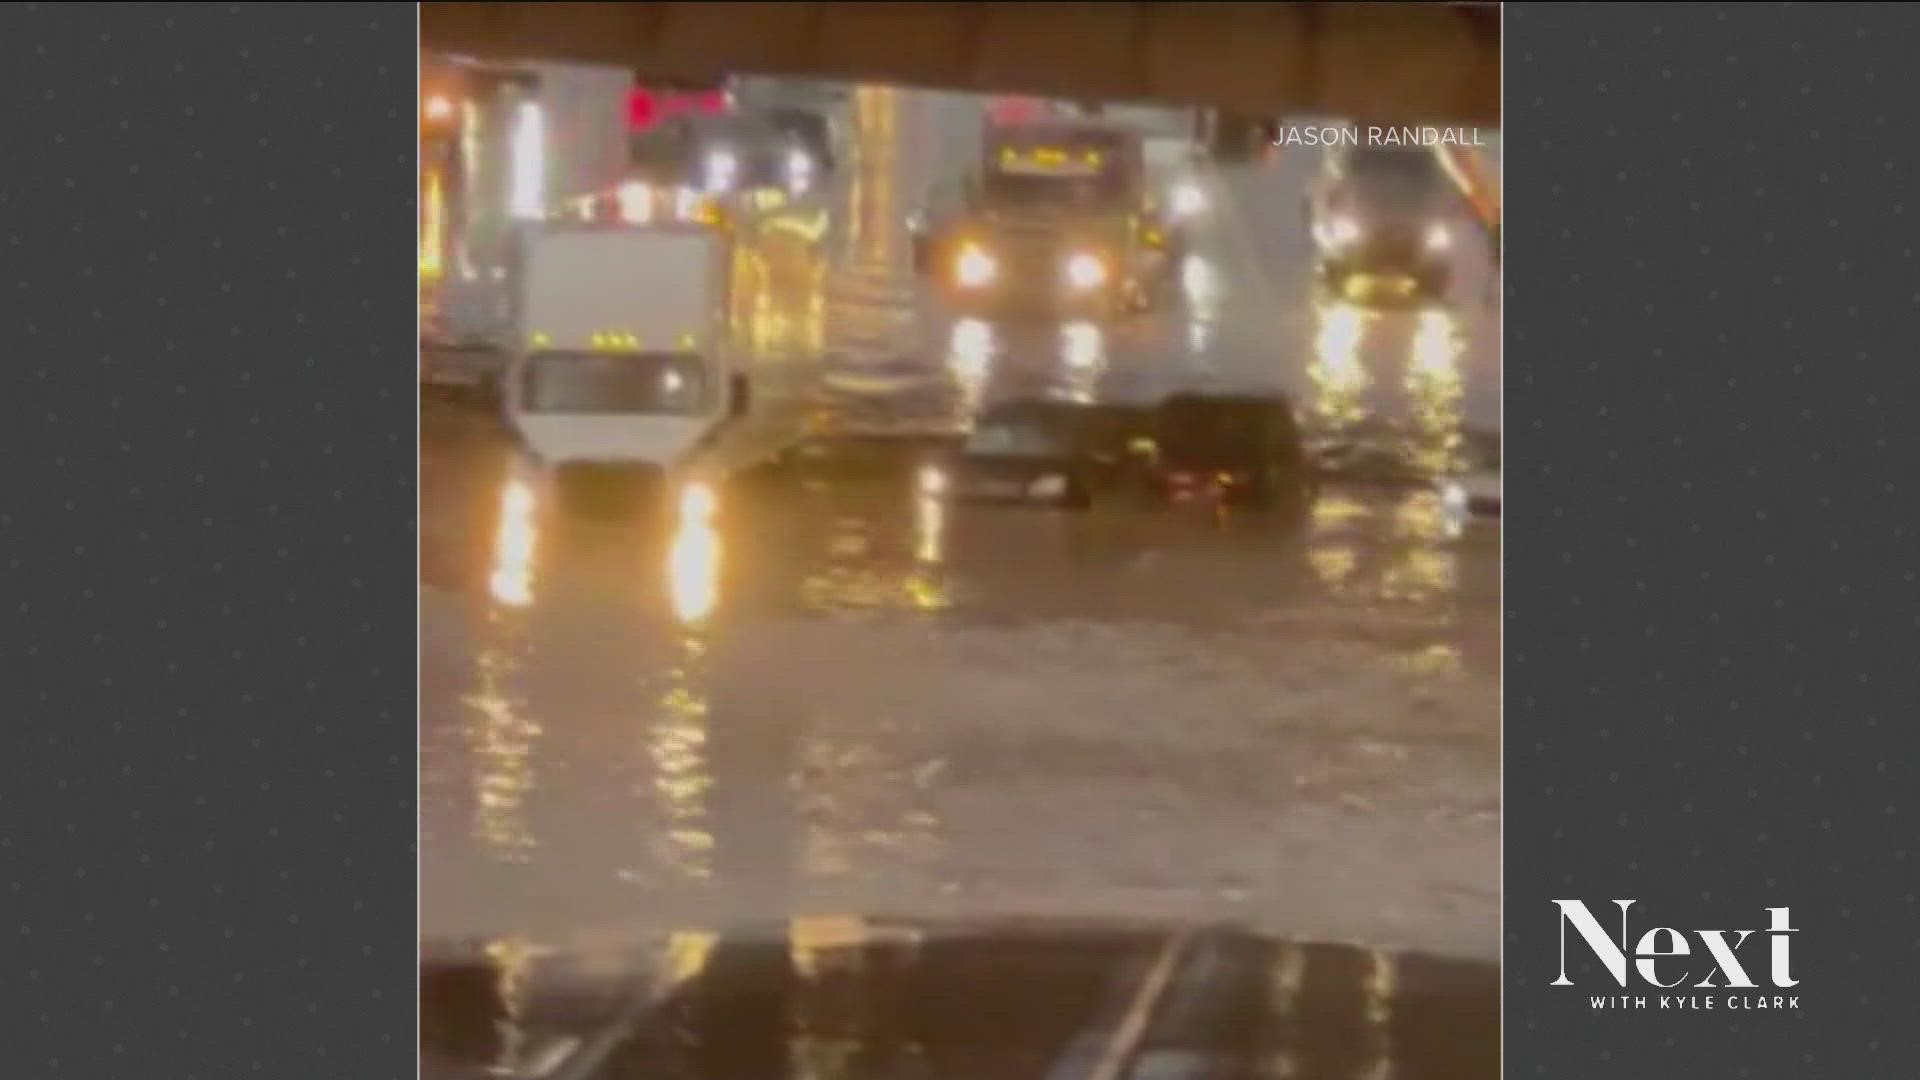 Internal CDOT emails show the state's transportation agency plans to enforce fines for three different issues related to the Aug. 7 flooding.